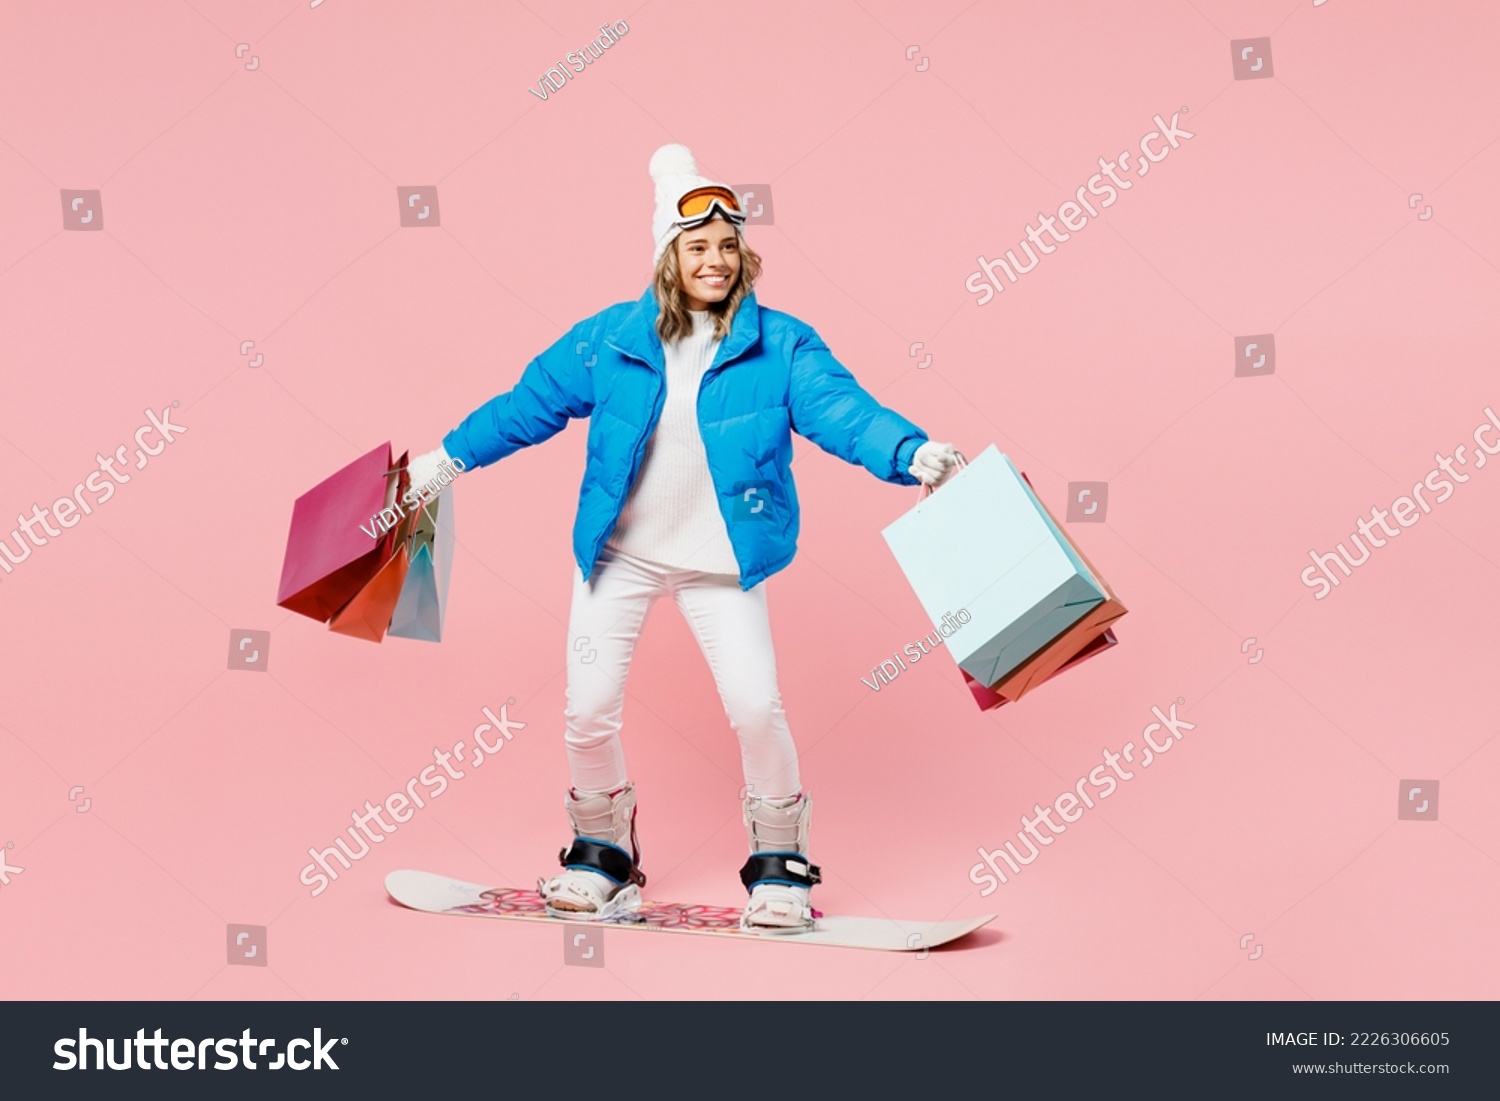 Snowboarder fun woman wear blue suit goggles mask hat ski jacket hold shopping package bags isolated on plain pink background Winter extreme sport hobby trip relax, Black Friday sale buy day concept #2226306605